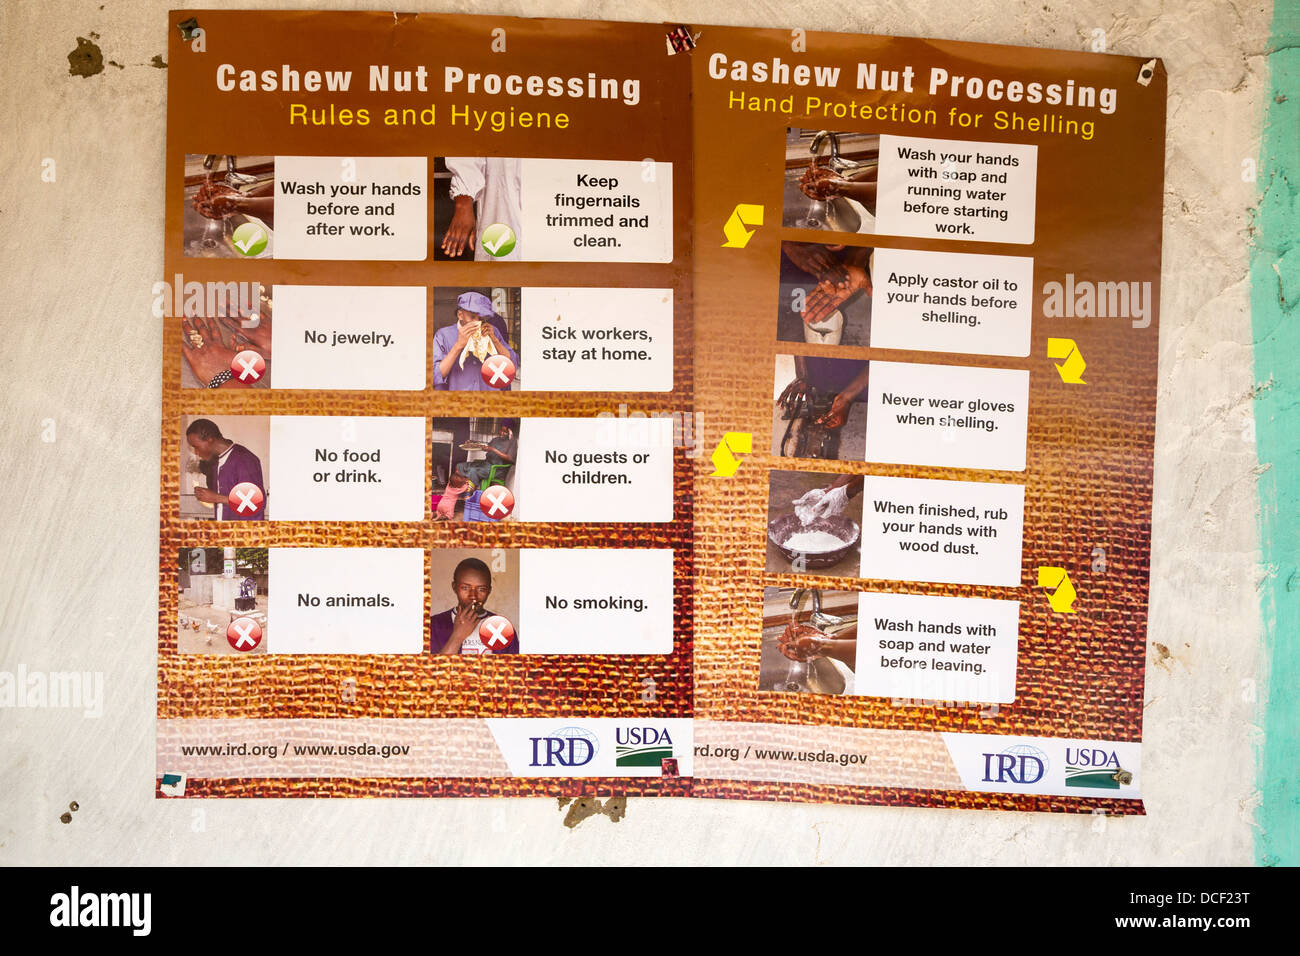 Rules and Hygiene for Workers. Group Juboo Cashew Nut  Processing Center, Fass Njaga Choi, North Bank Region, The Gambia Stock Photo